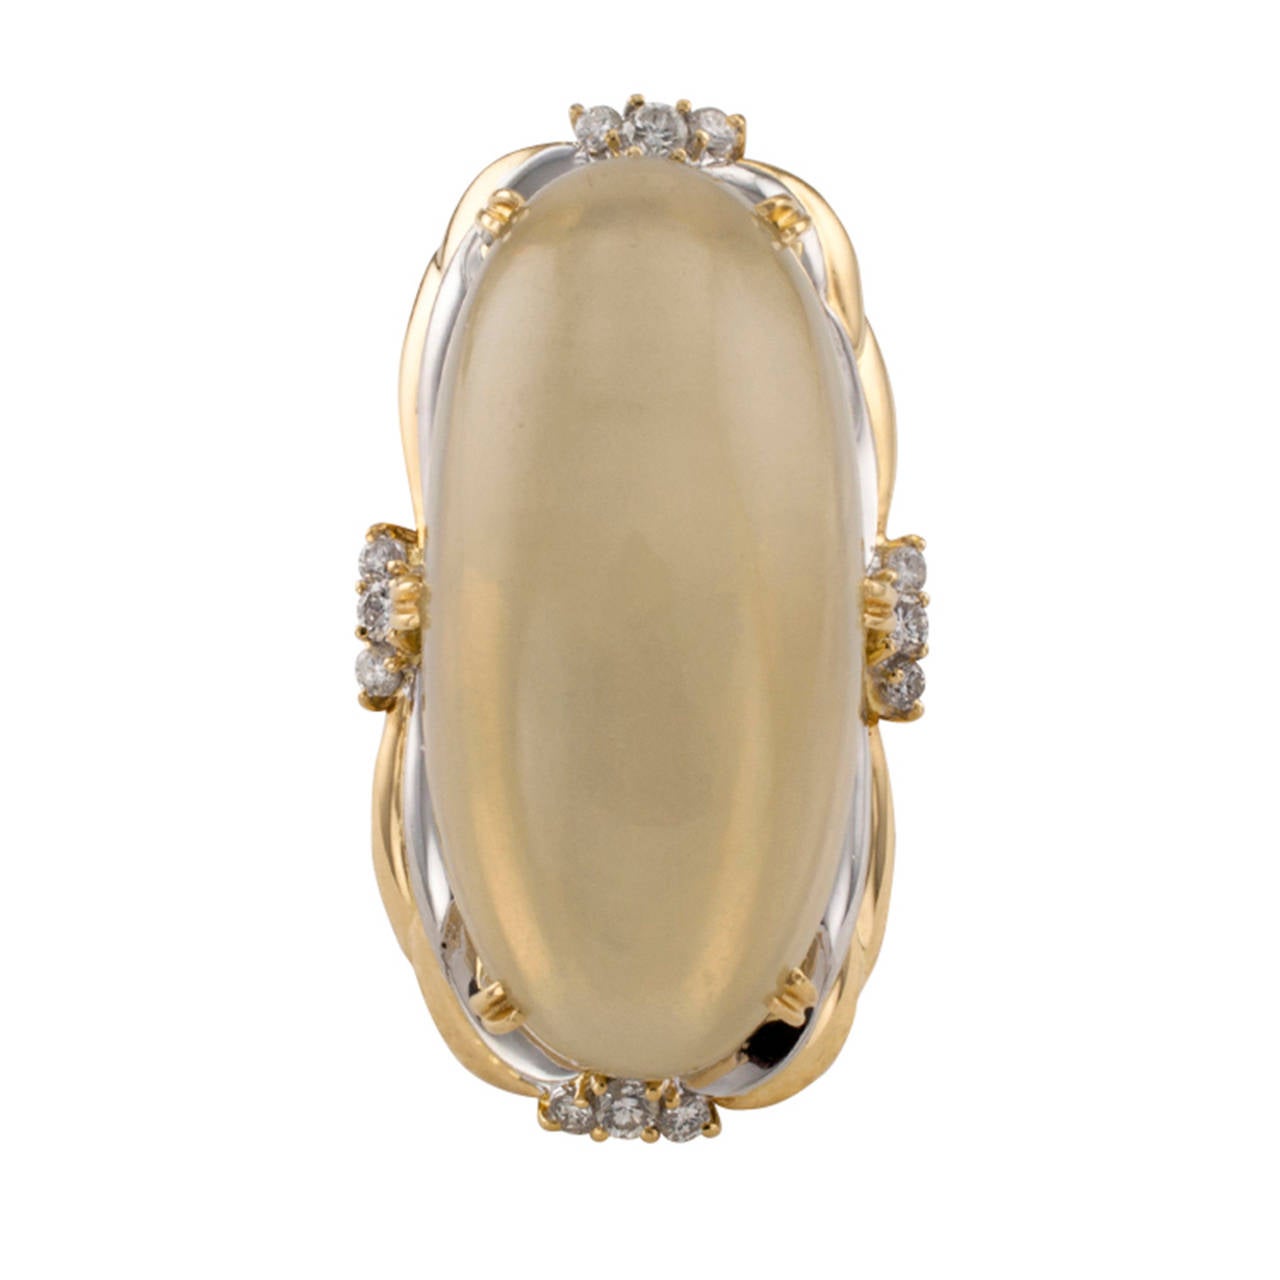 Large And Contemporary Moonstone And Diamond Cocktail Ring

This two-tone ring, in 18 karat yellow gold and platinum, is all about this  large iridescent light-olive-gold pearly moonstone weighing approximately 55.00 carats, prong-set on a simple,